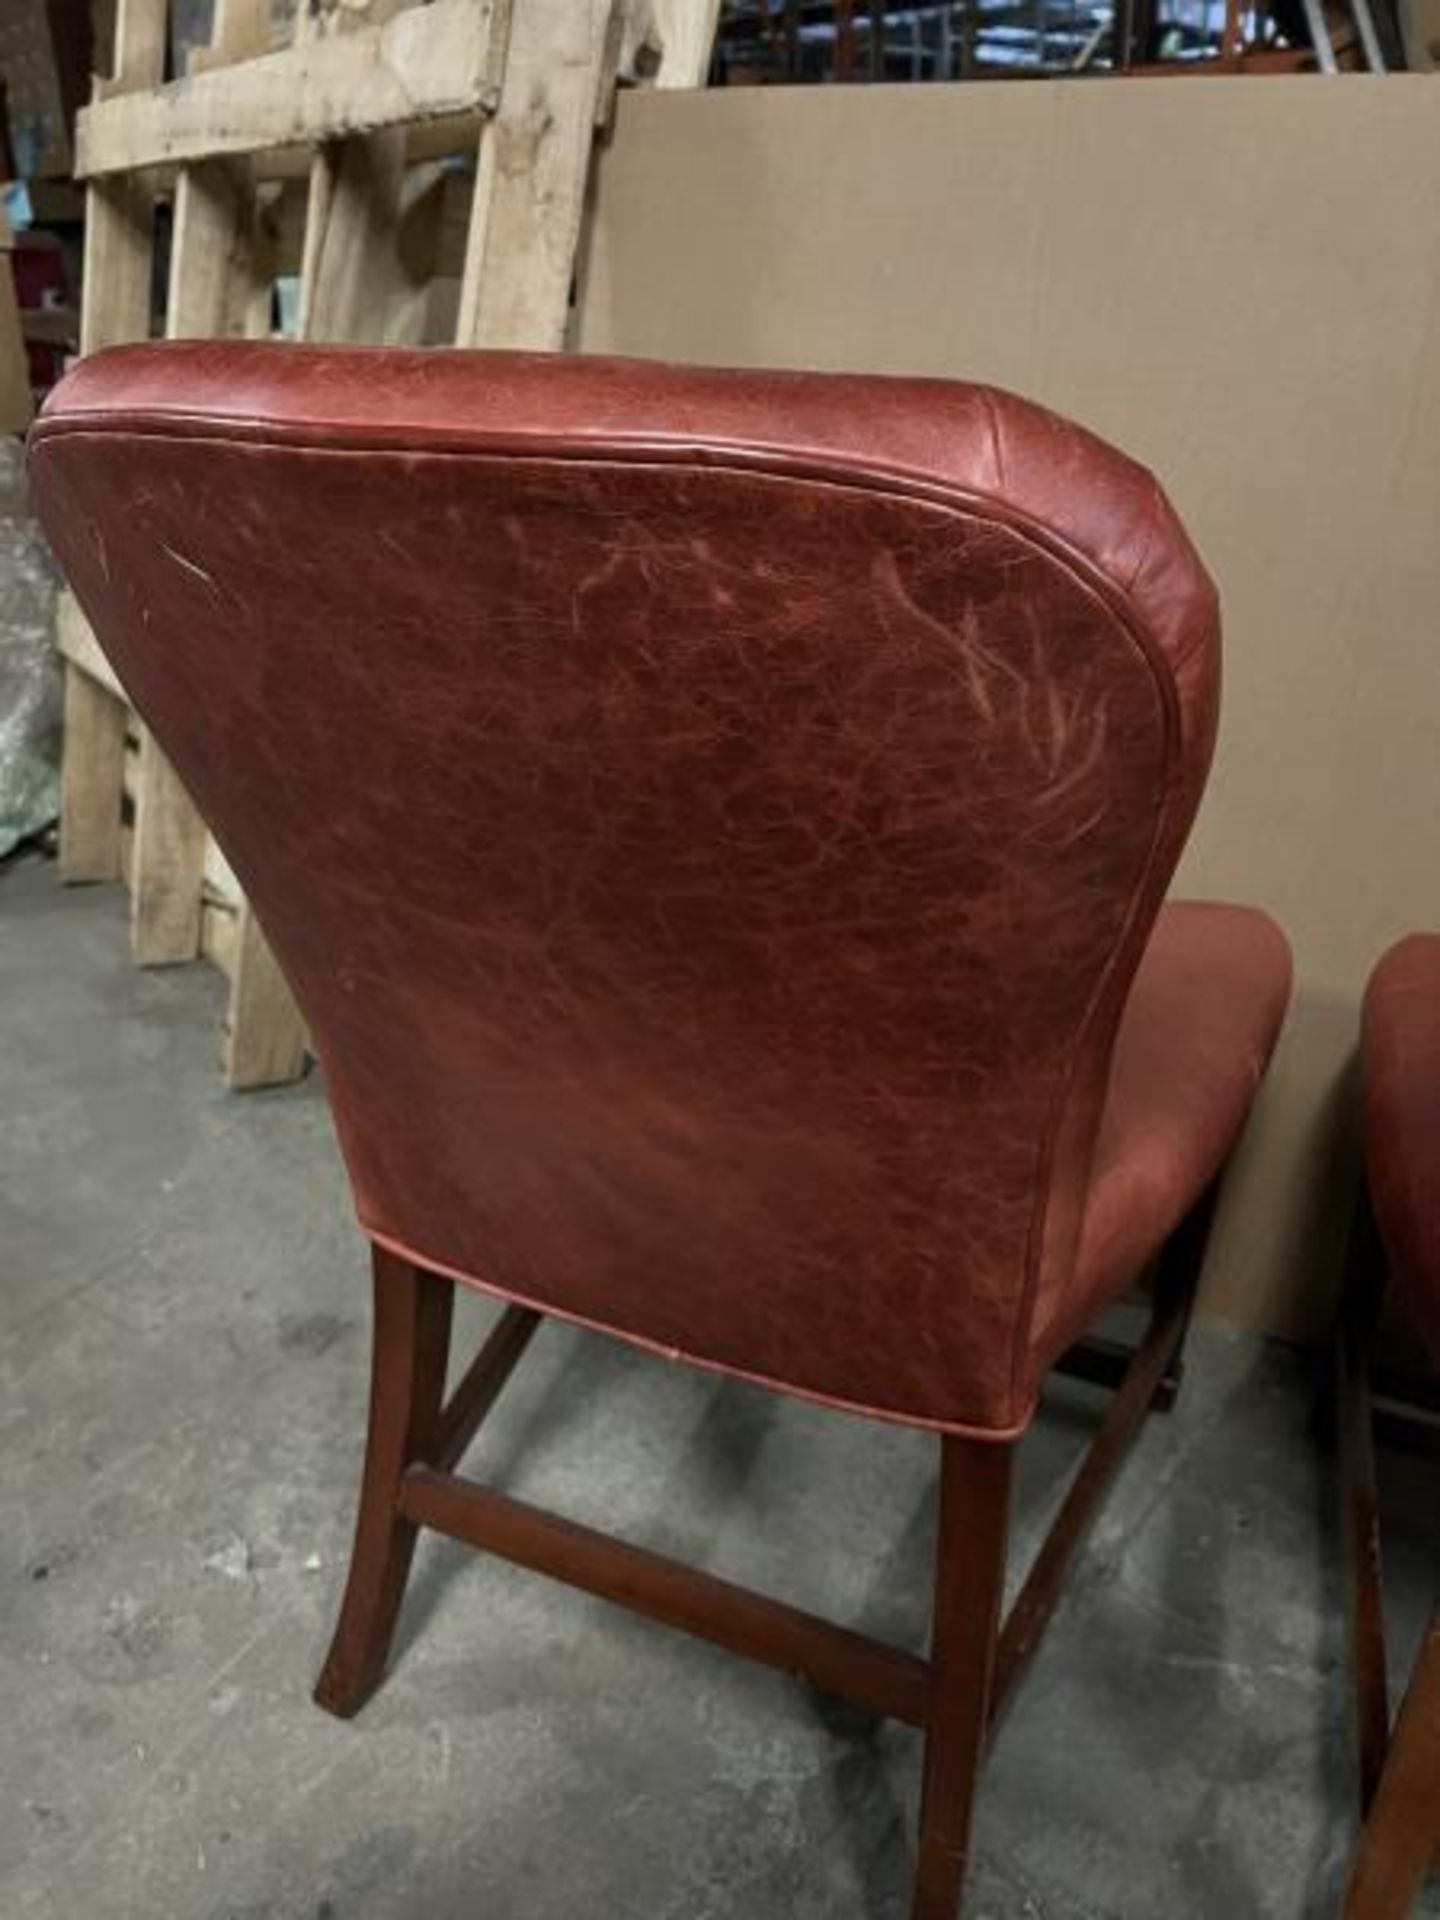 Pair of Red Vinyl Chairs; Located in Mill Building - Image 15 of 20